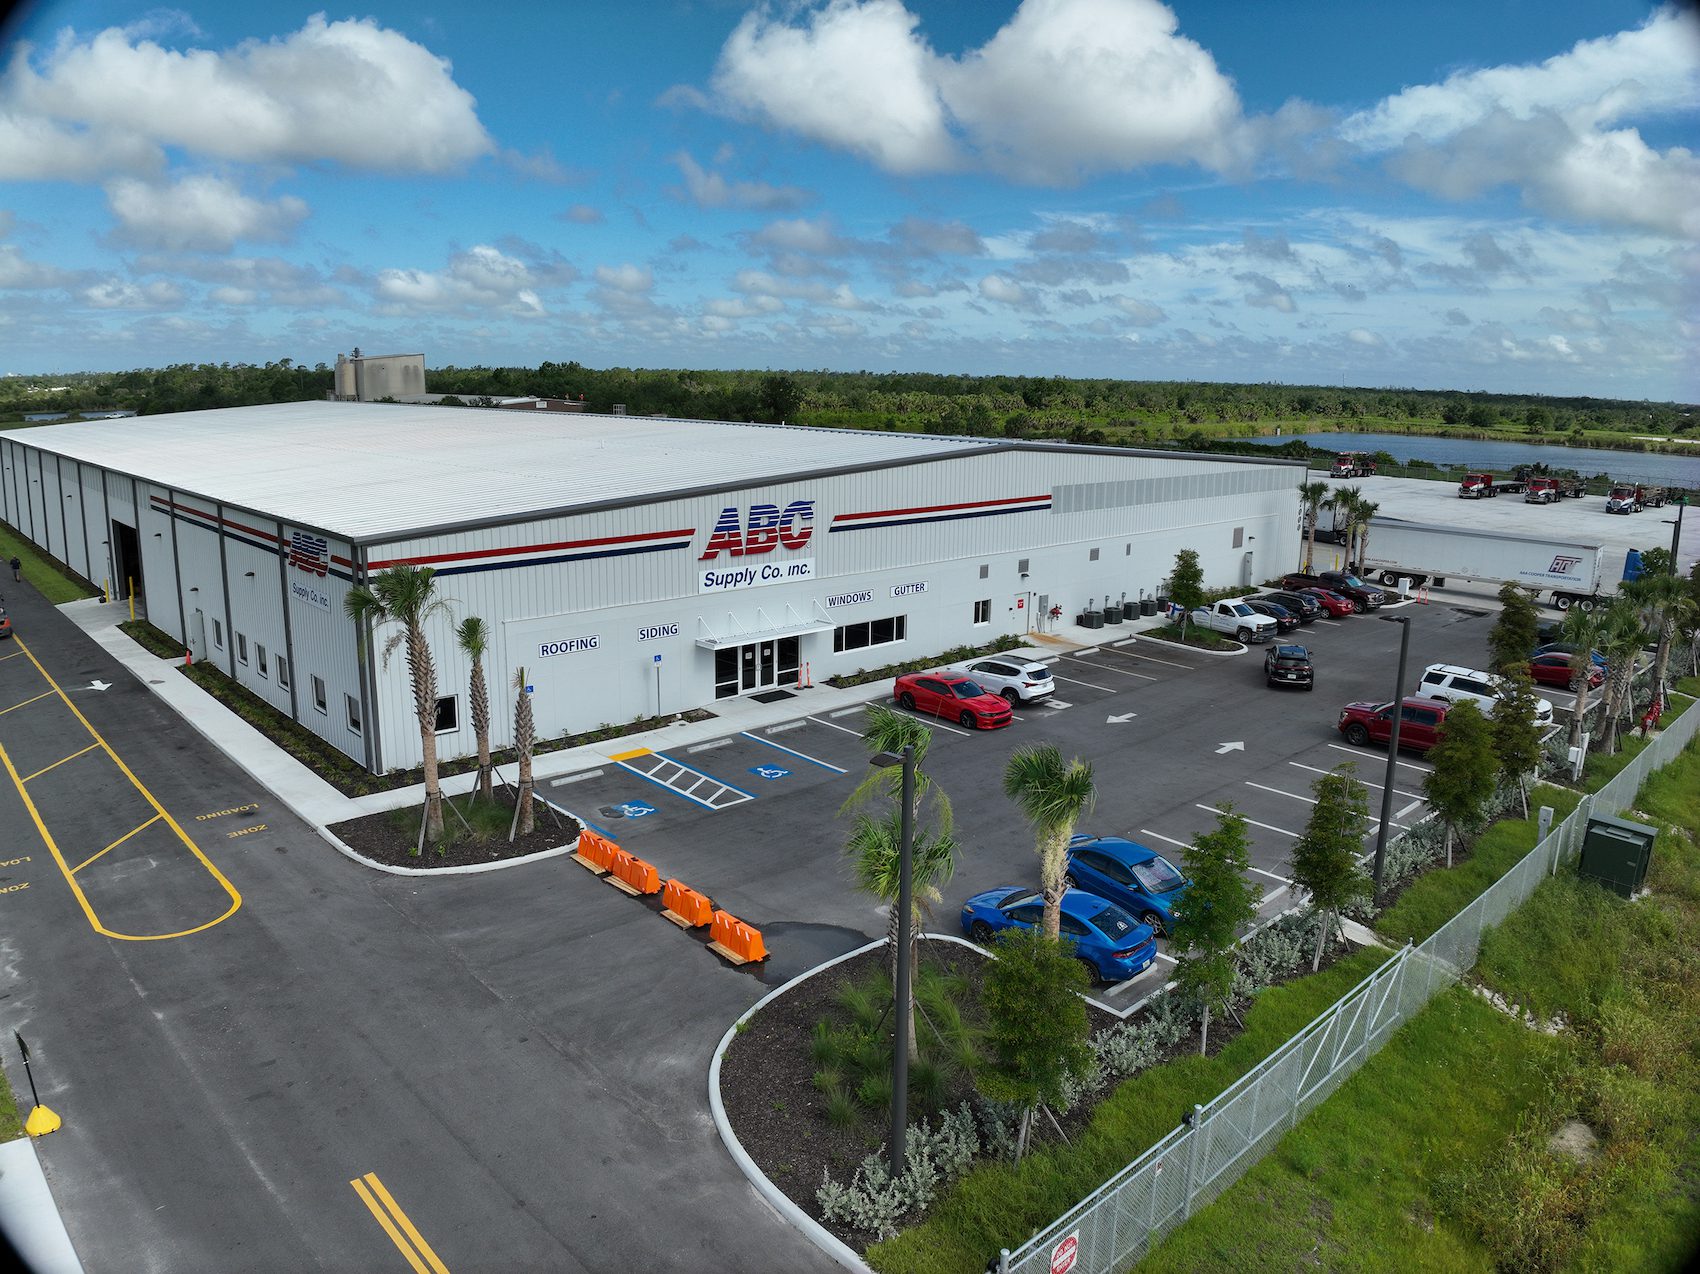 Seagate Development Group Announces Completion of 9 Acre Complex For ABC Supply, Inc in Charlotte County